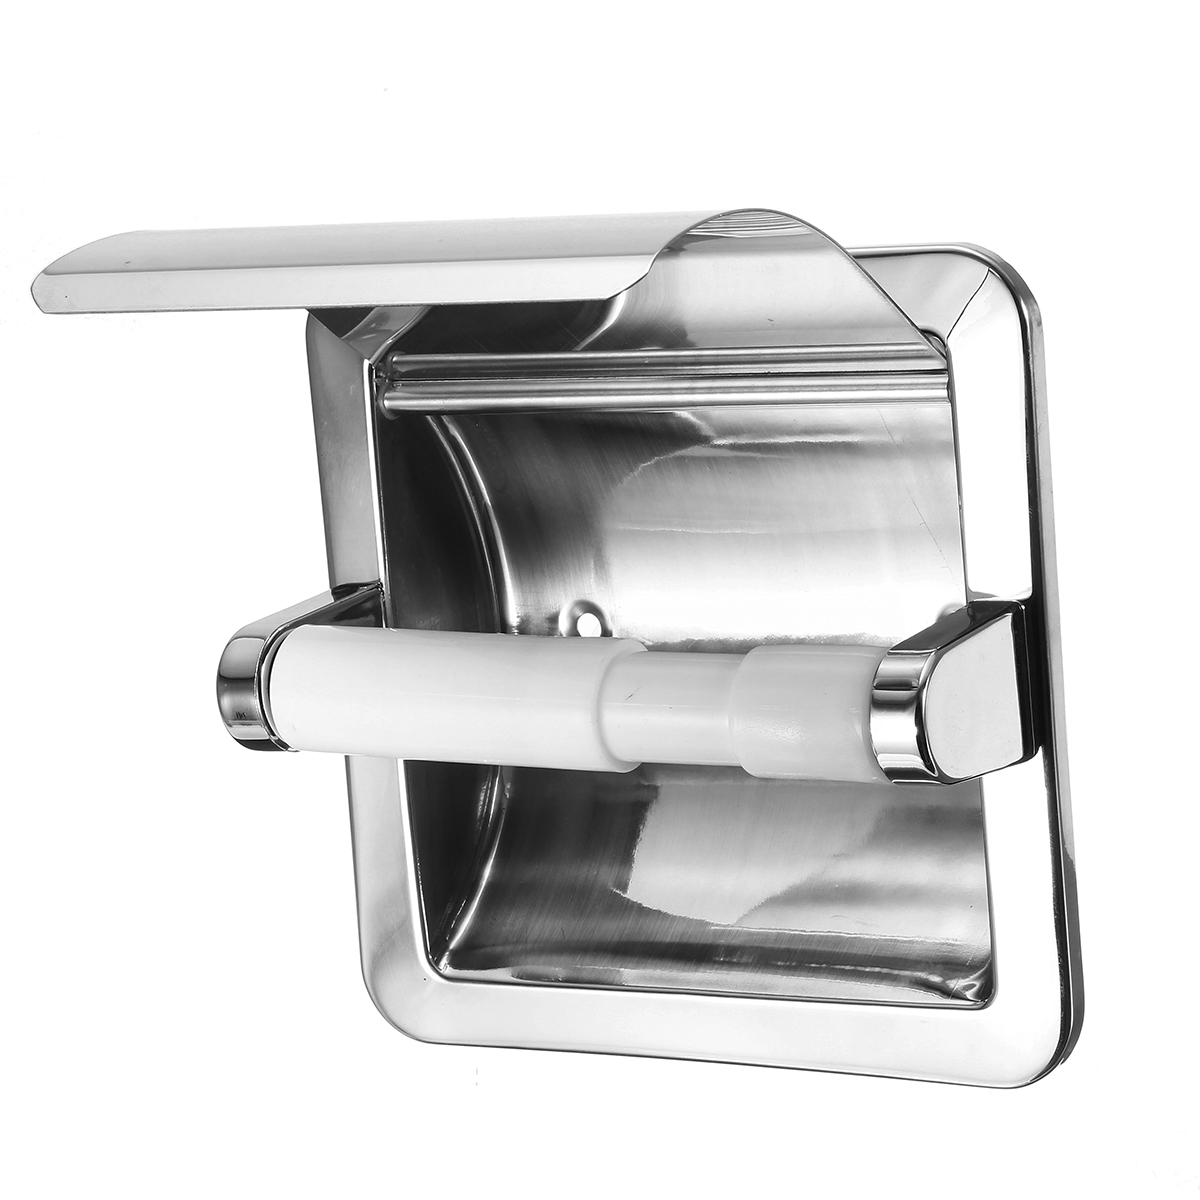 Recessed-Toilet-Paper-Roll-Holder-Tissue-Brushed-Nickel-Loaded-Stand-1210987